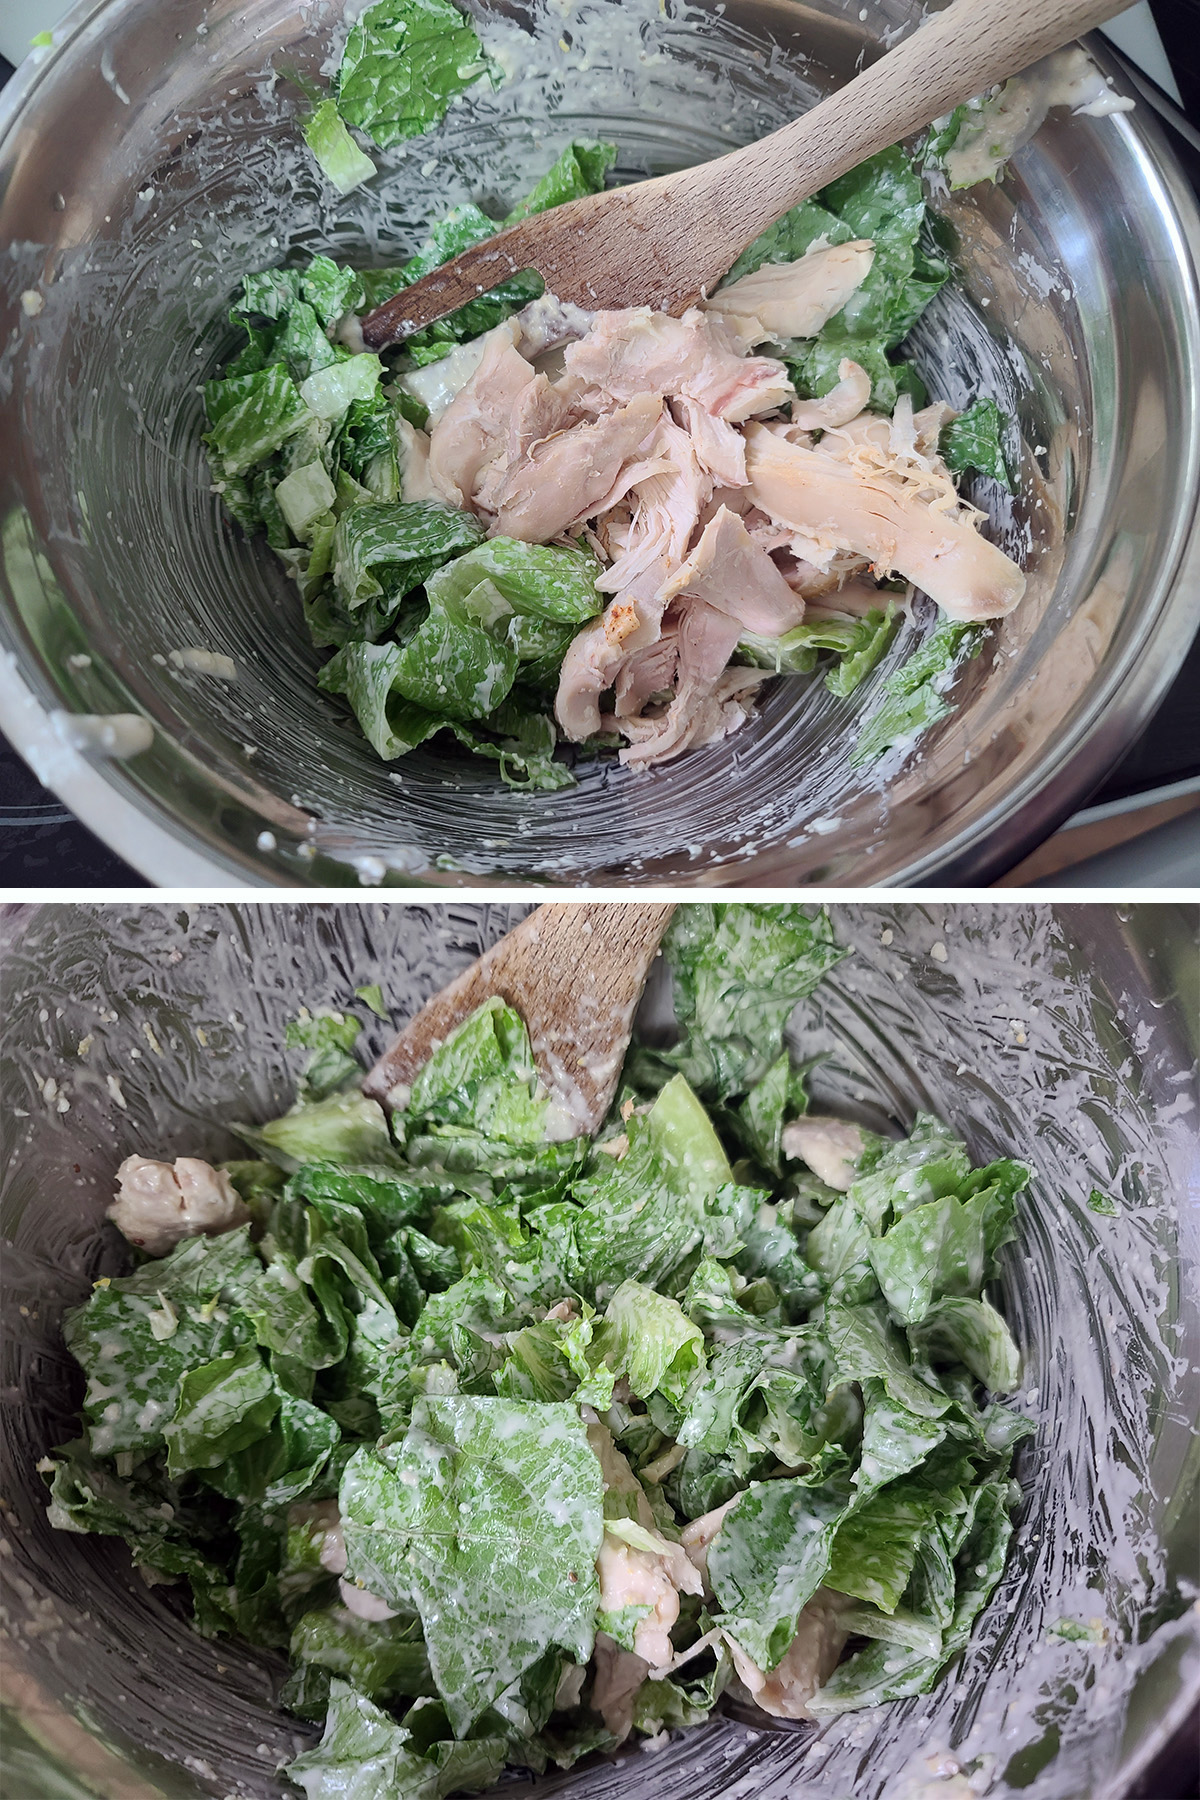 Caesar dressing being mixed into a salad.